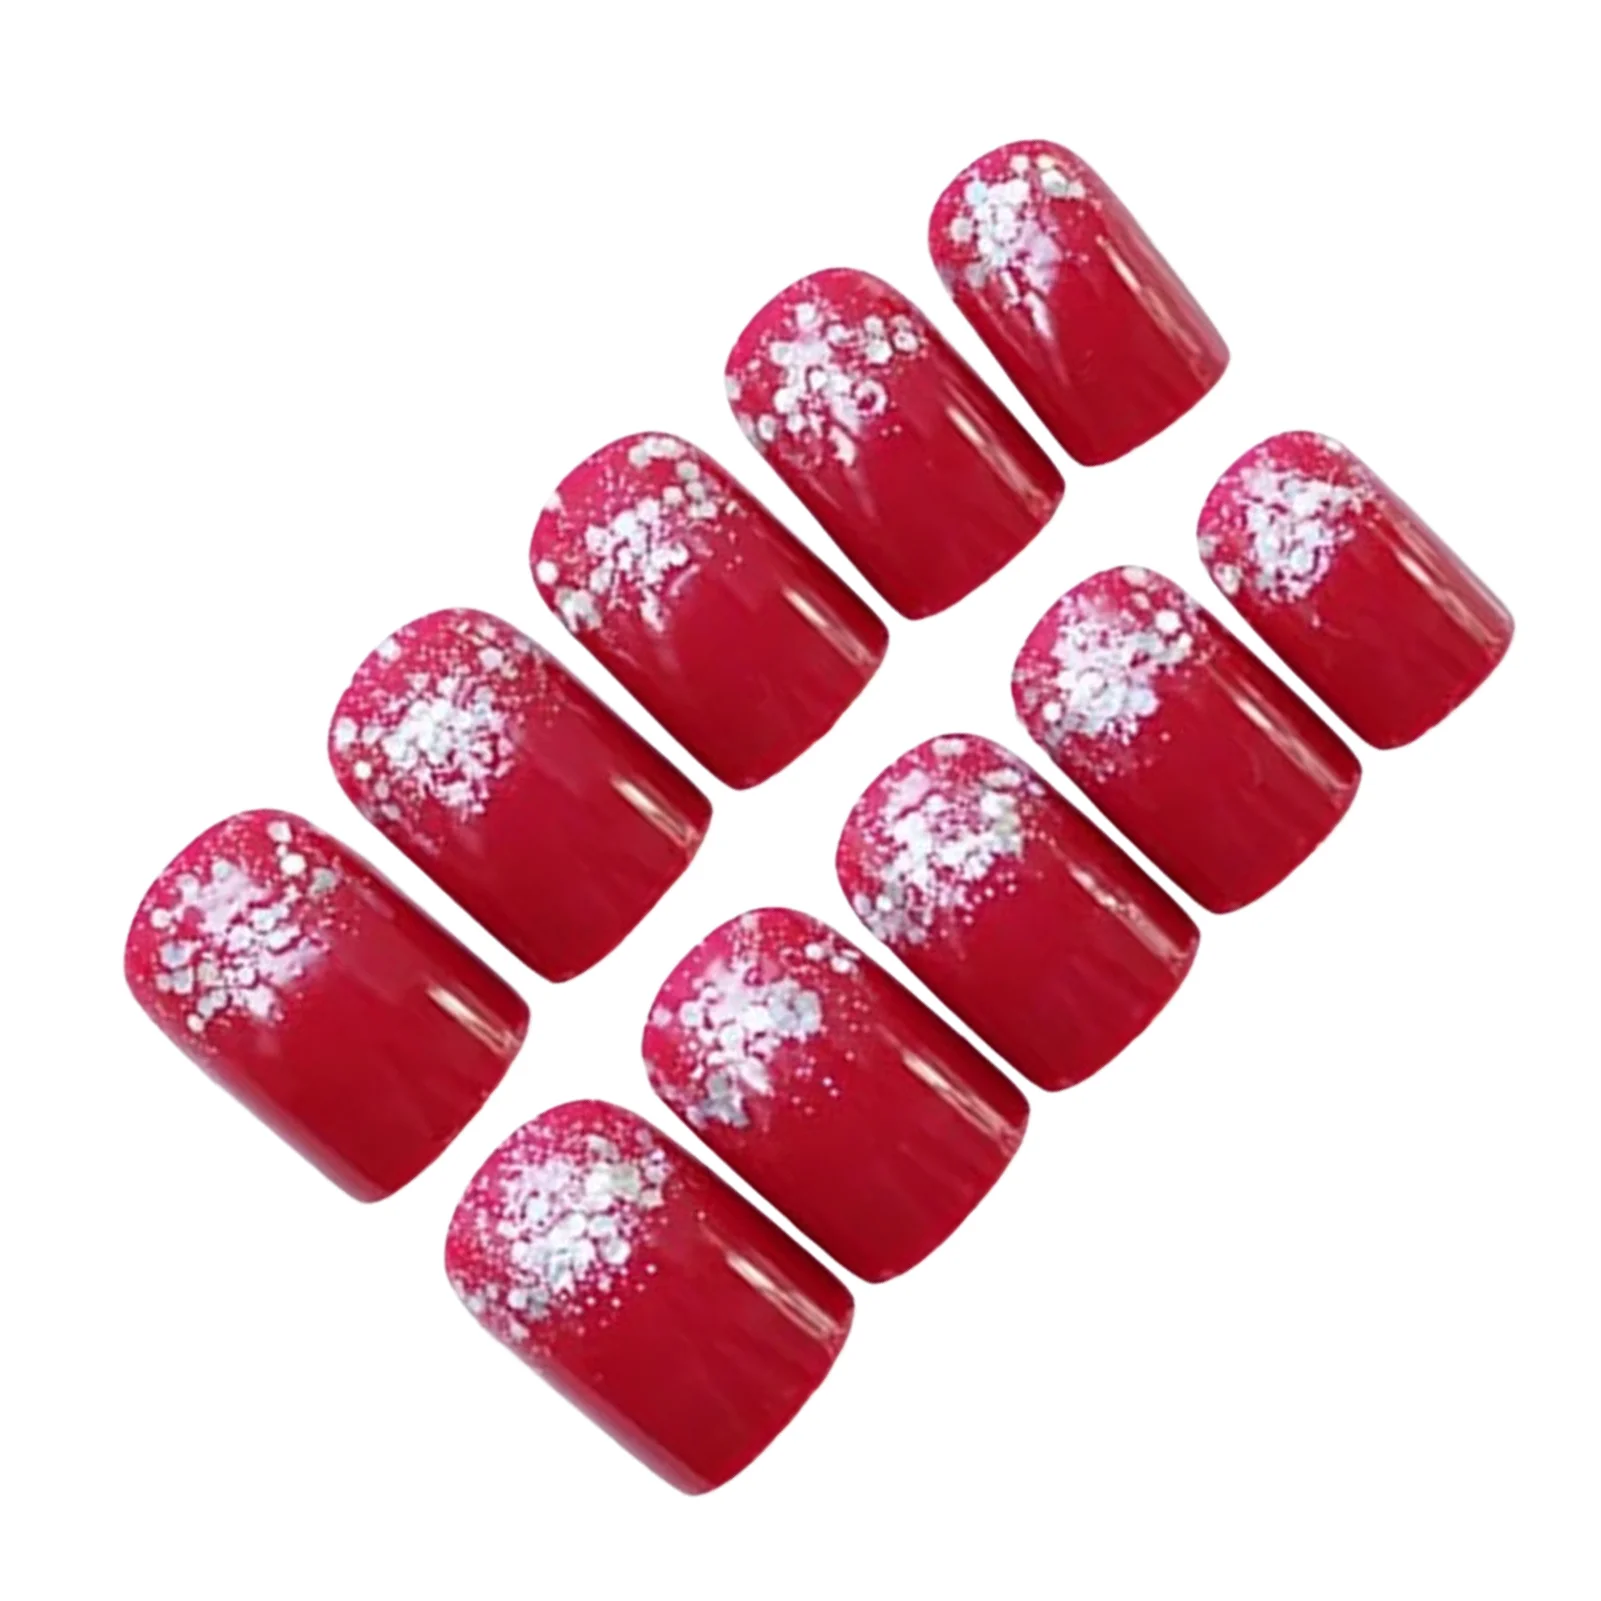 

Glossy Red Fake Nails with Glitter Printed Sweet & Charming Reusable False Nails for Shopping Traveling Dating